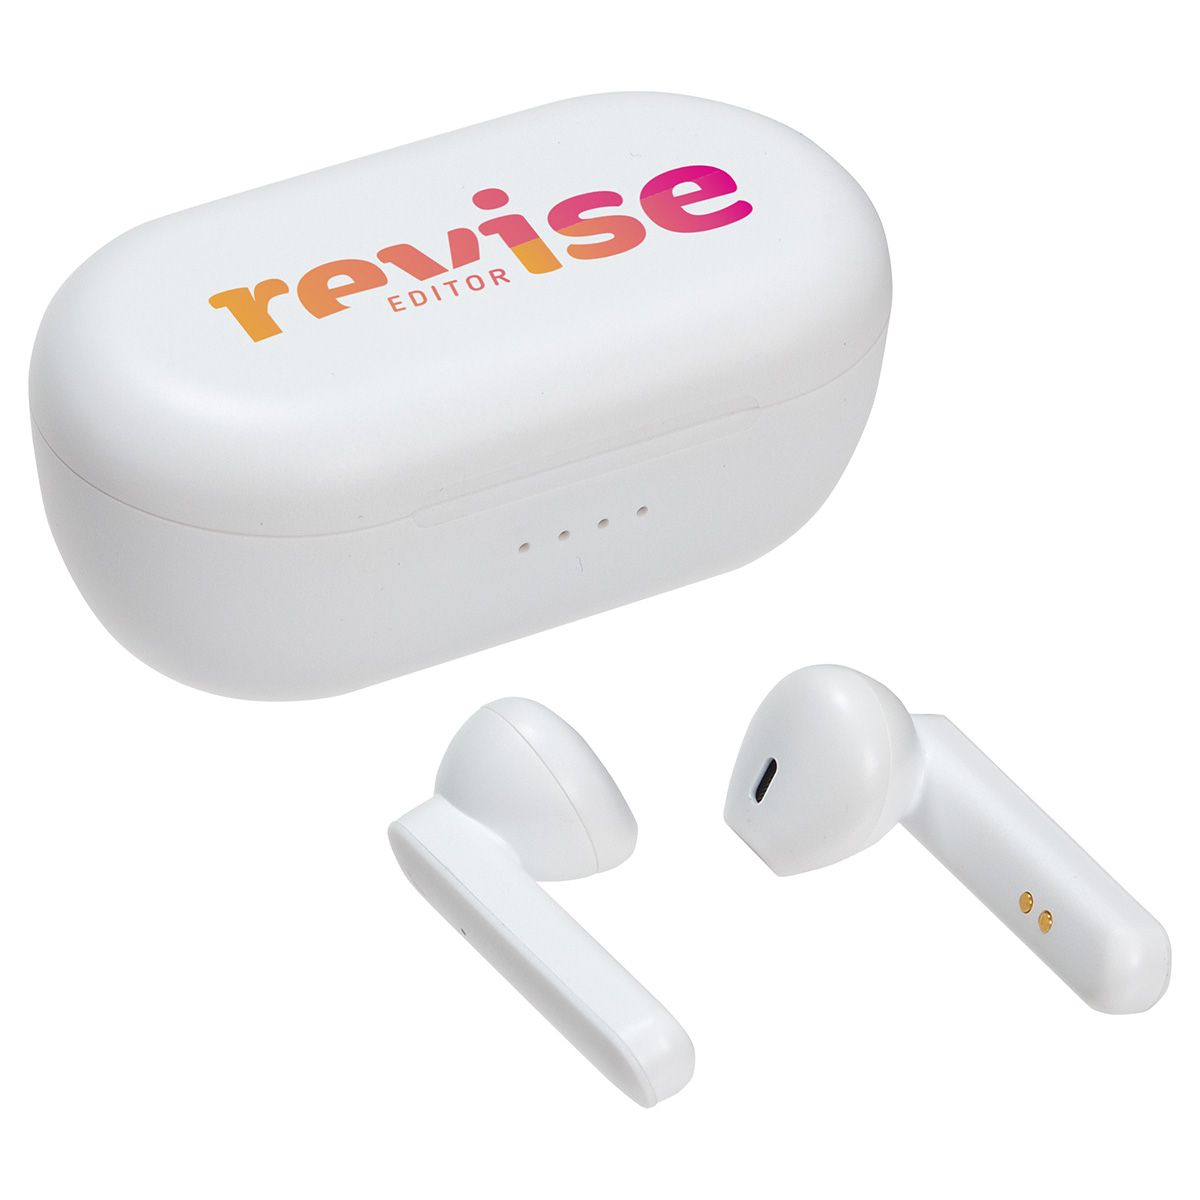 Earbuds with a case